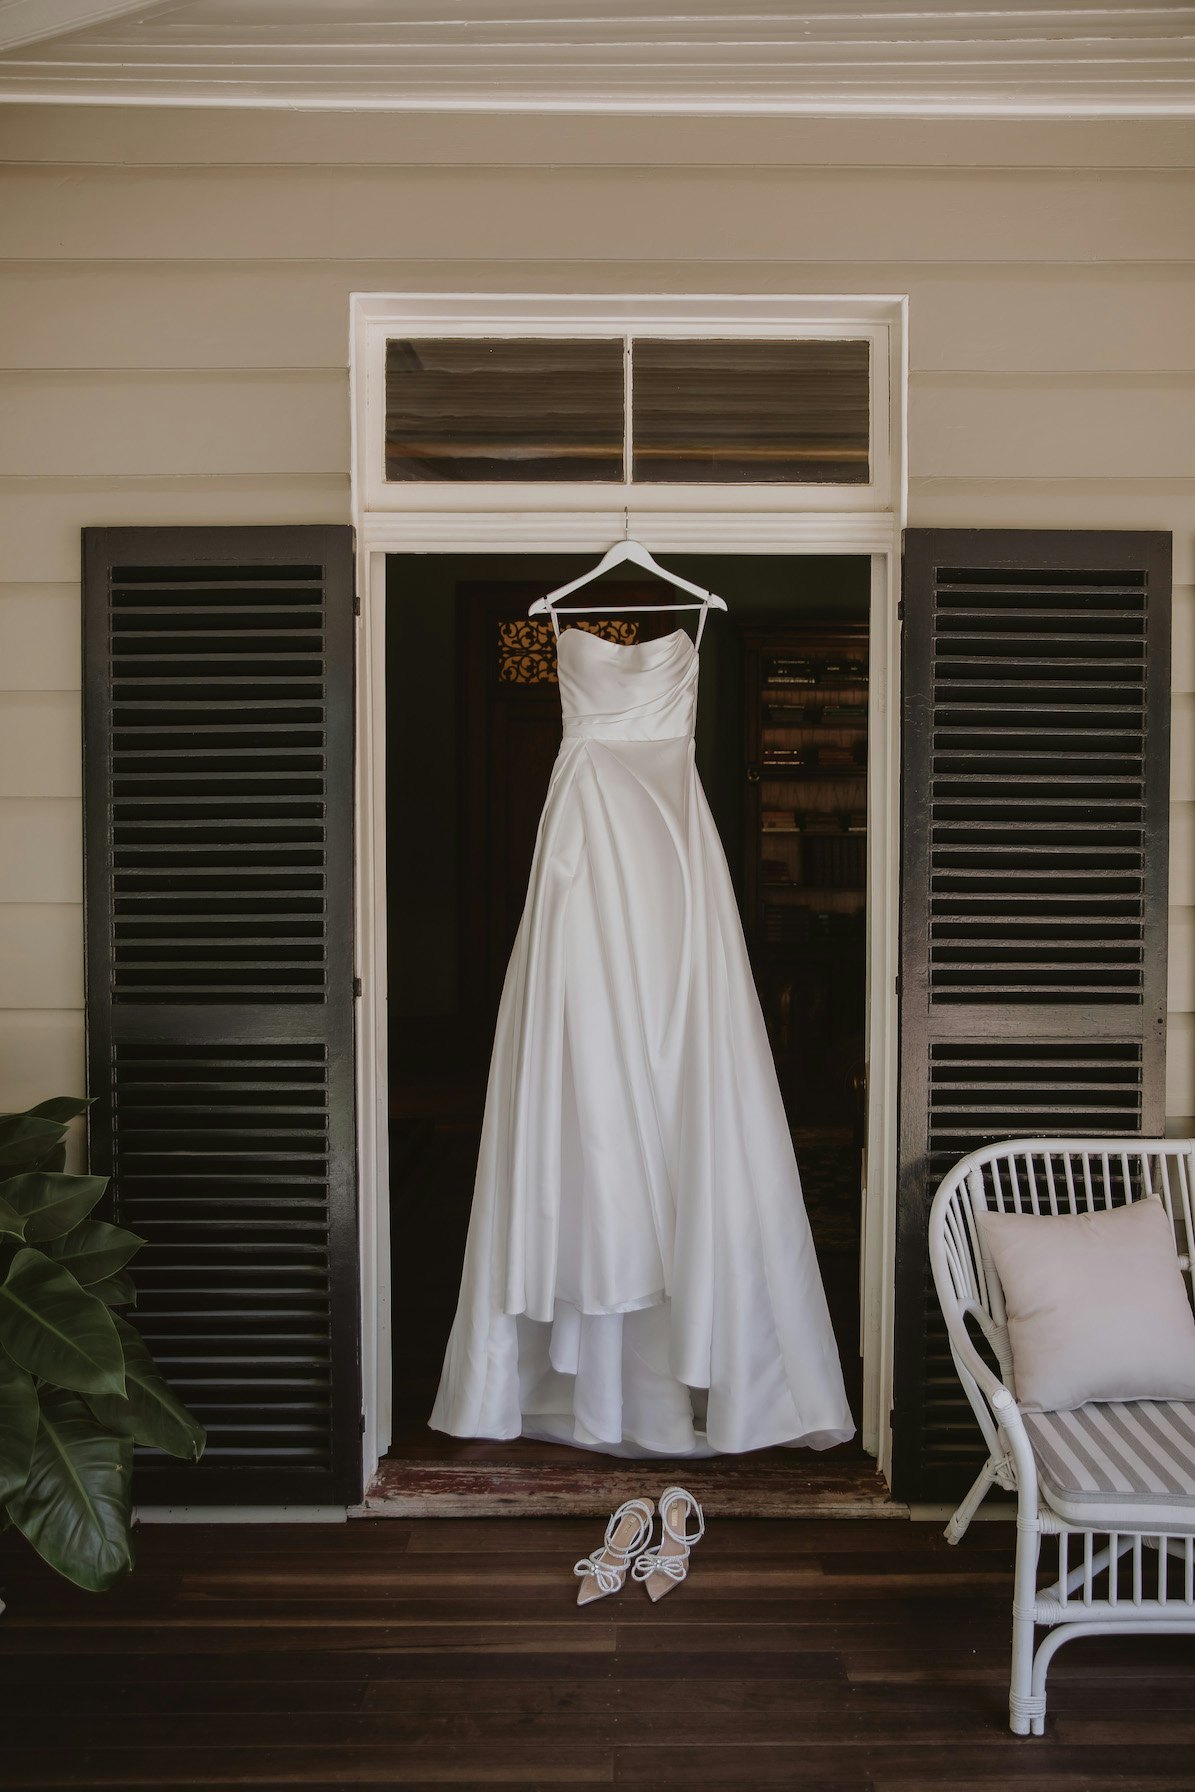 Hanging dress with wedding shoes 